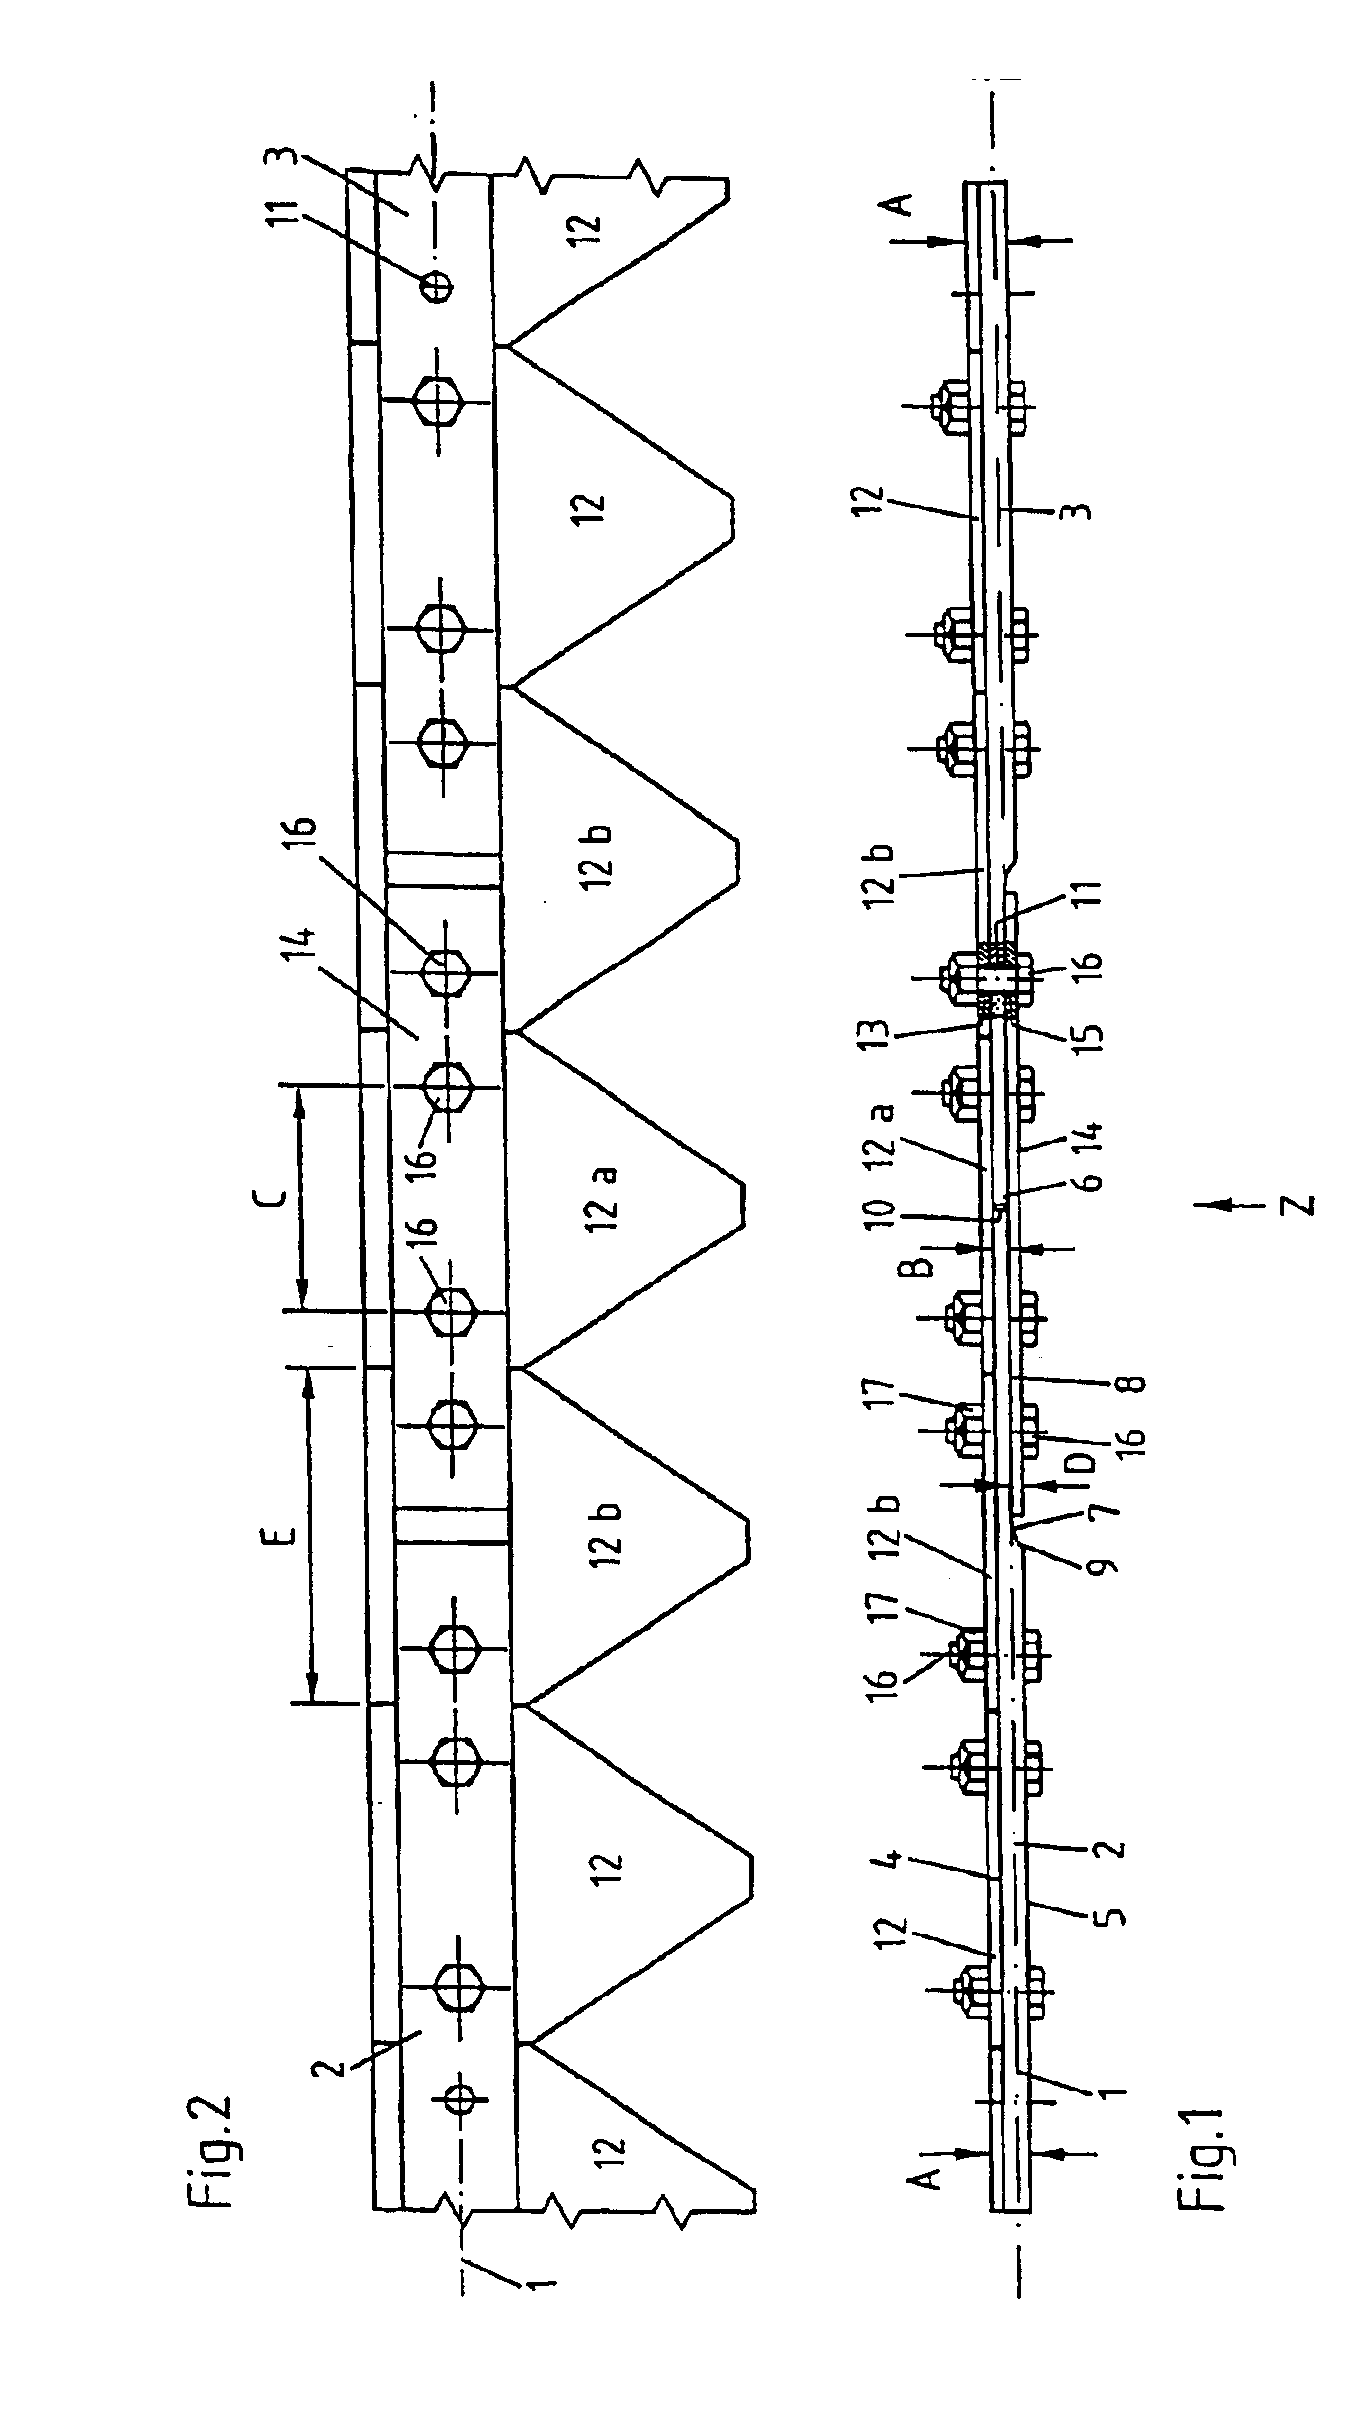 Mowing blade comprising a blade bar composed of bar sections